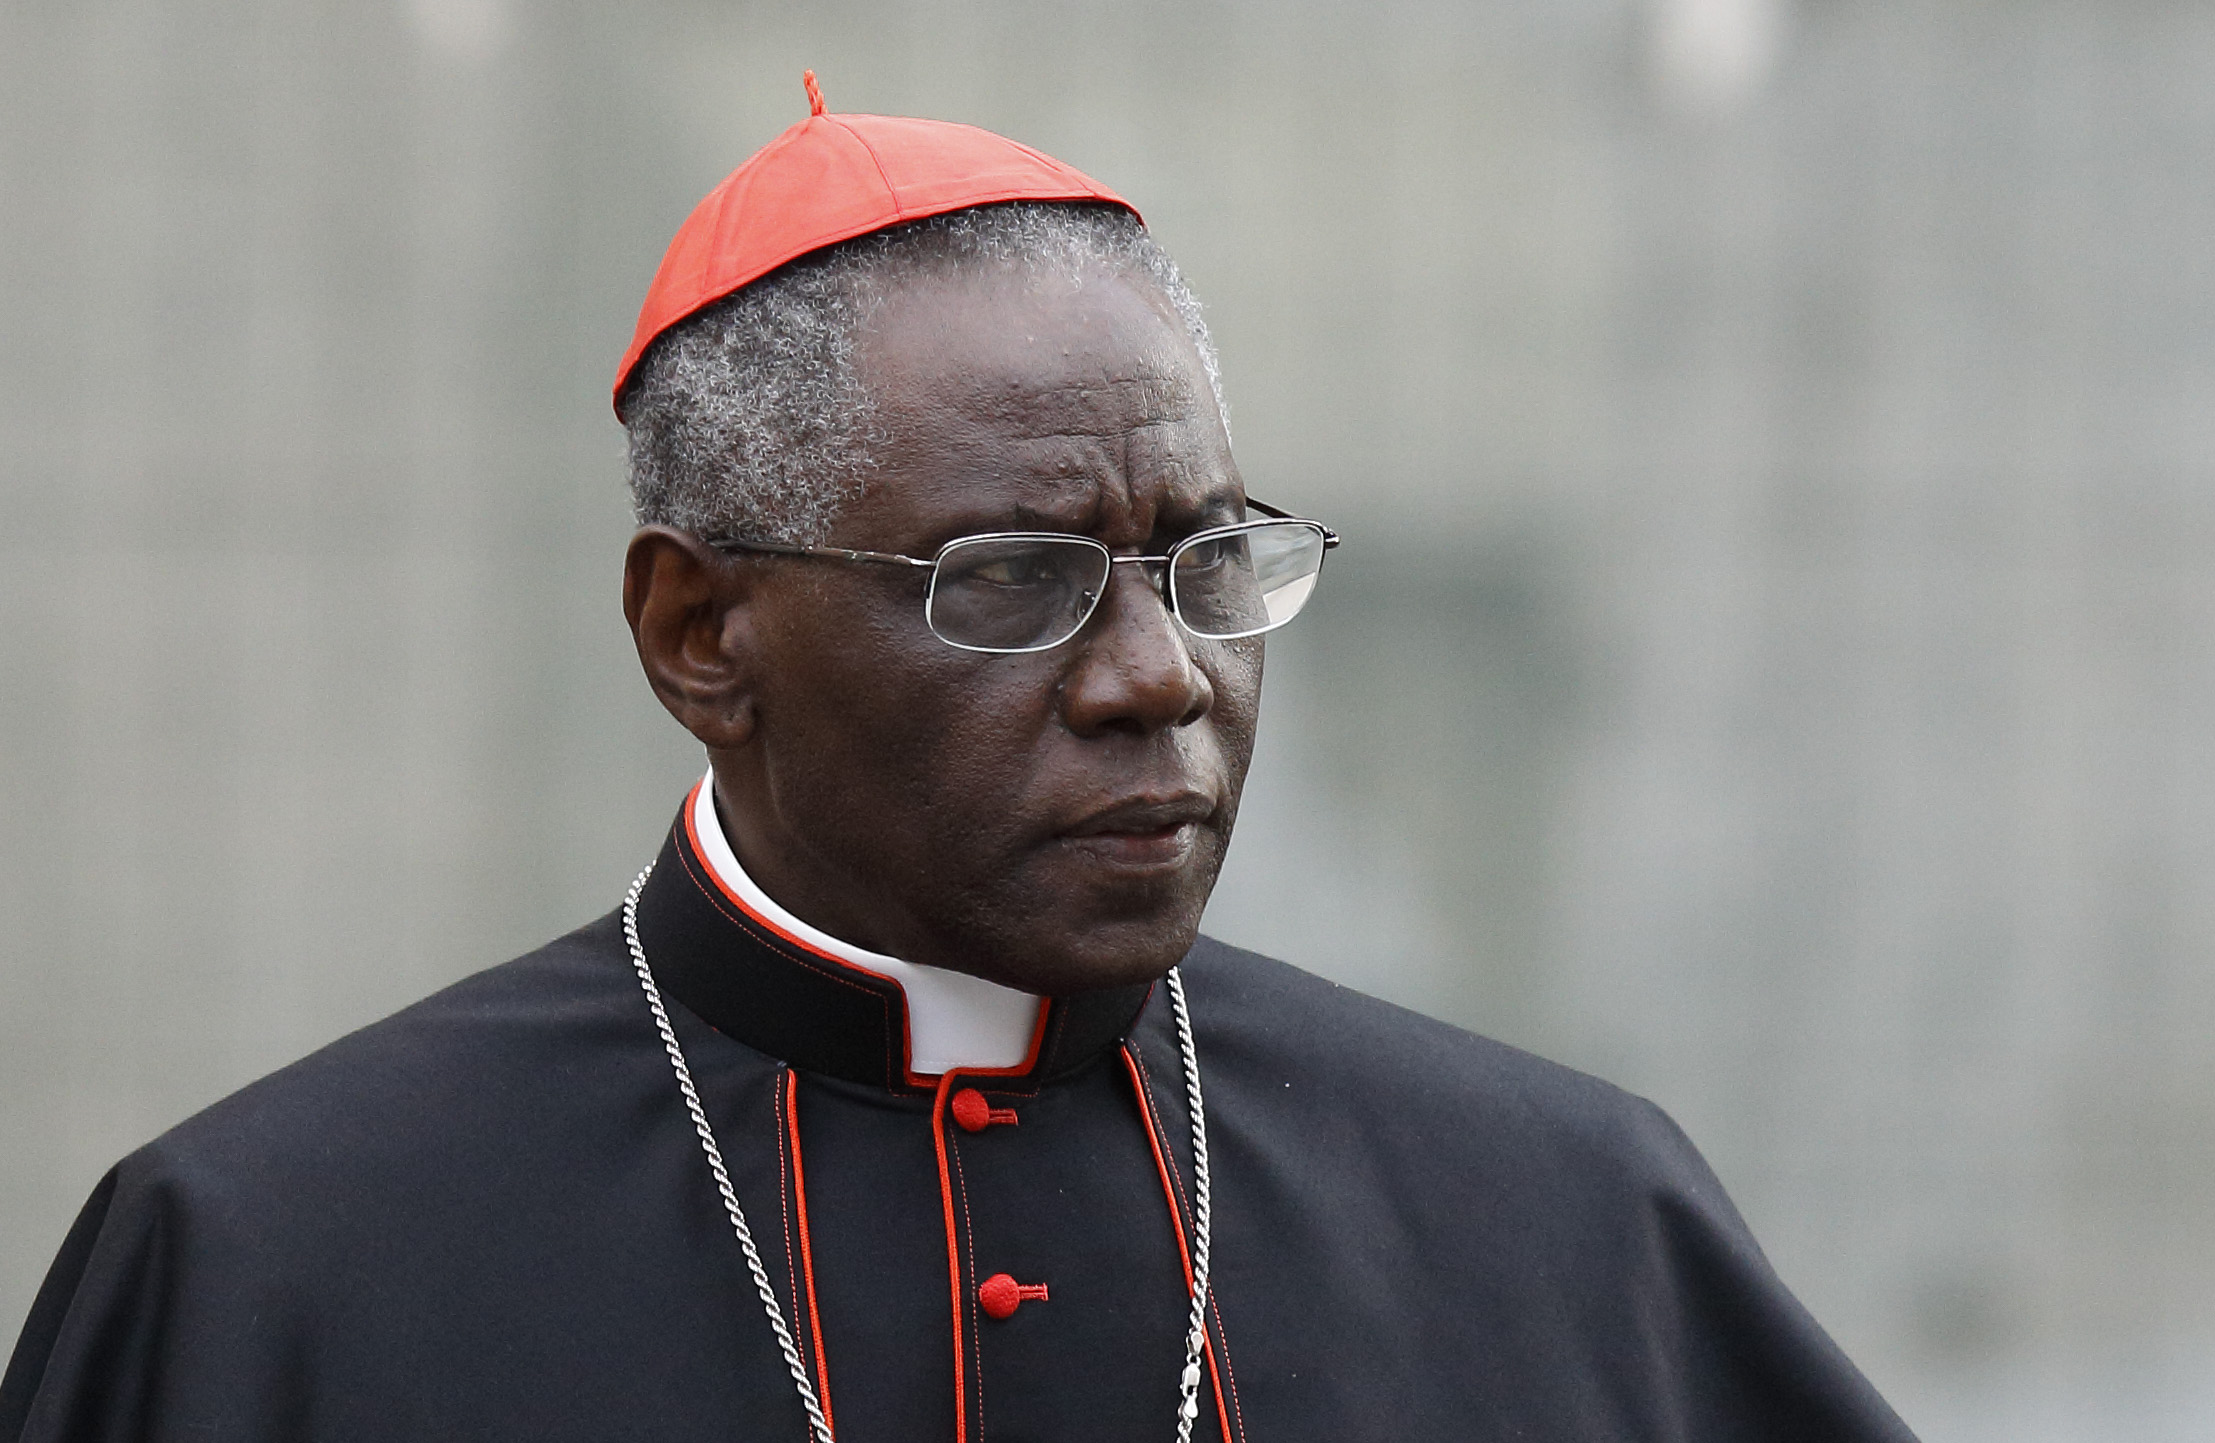 Cardinal Robert Sarah, prefect of the Congregation for Divine Worship and the Sacraments, is pictured at the Vatican in this Oct. 9, 2012, file photo. Cardinal Sarah, the Vatican's liturgy chief, has asked priests to begin celebrating the Eucharist facing east, the same direction the congregation faces. Although not commonplace, the practice is already permitted by church law. Cardinal Sarah made his request during a speech at the Sacra Liturgia conference in London July 5. (CNS photo/Paul Haring)